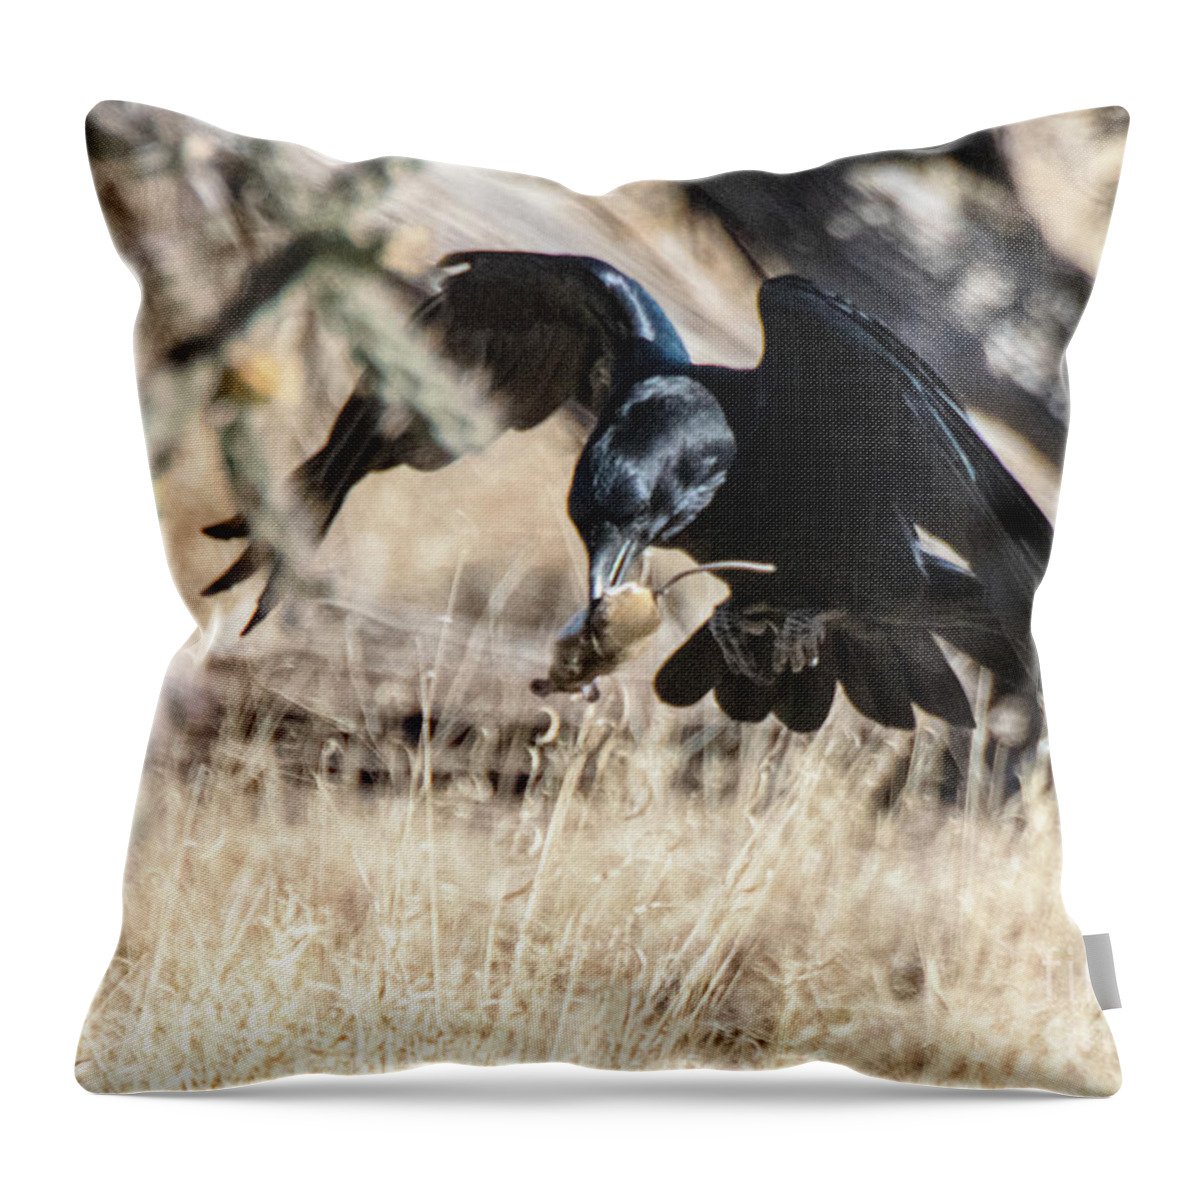 Natanson Throw Pillow featuring the photograph Dances with Mouse by Steven Natanson